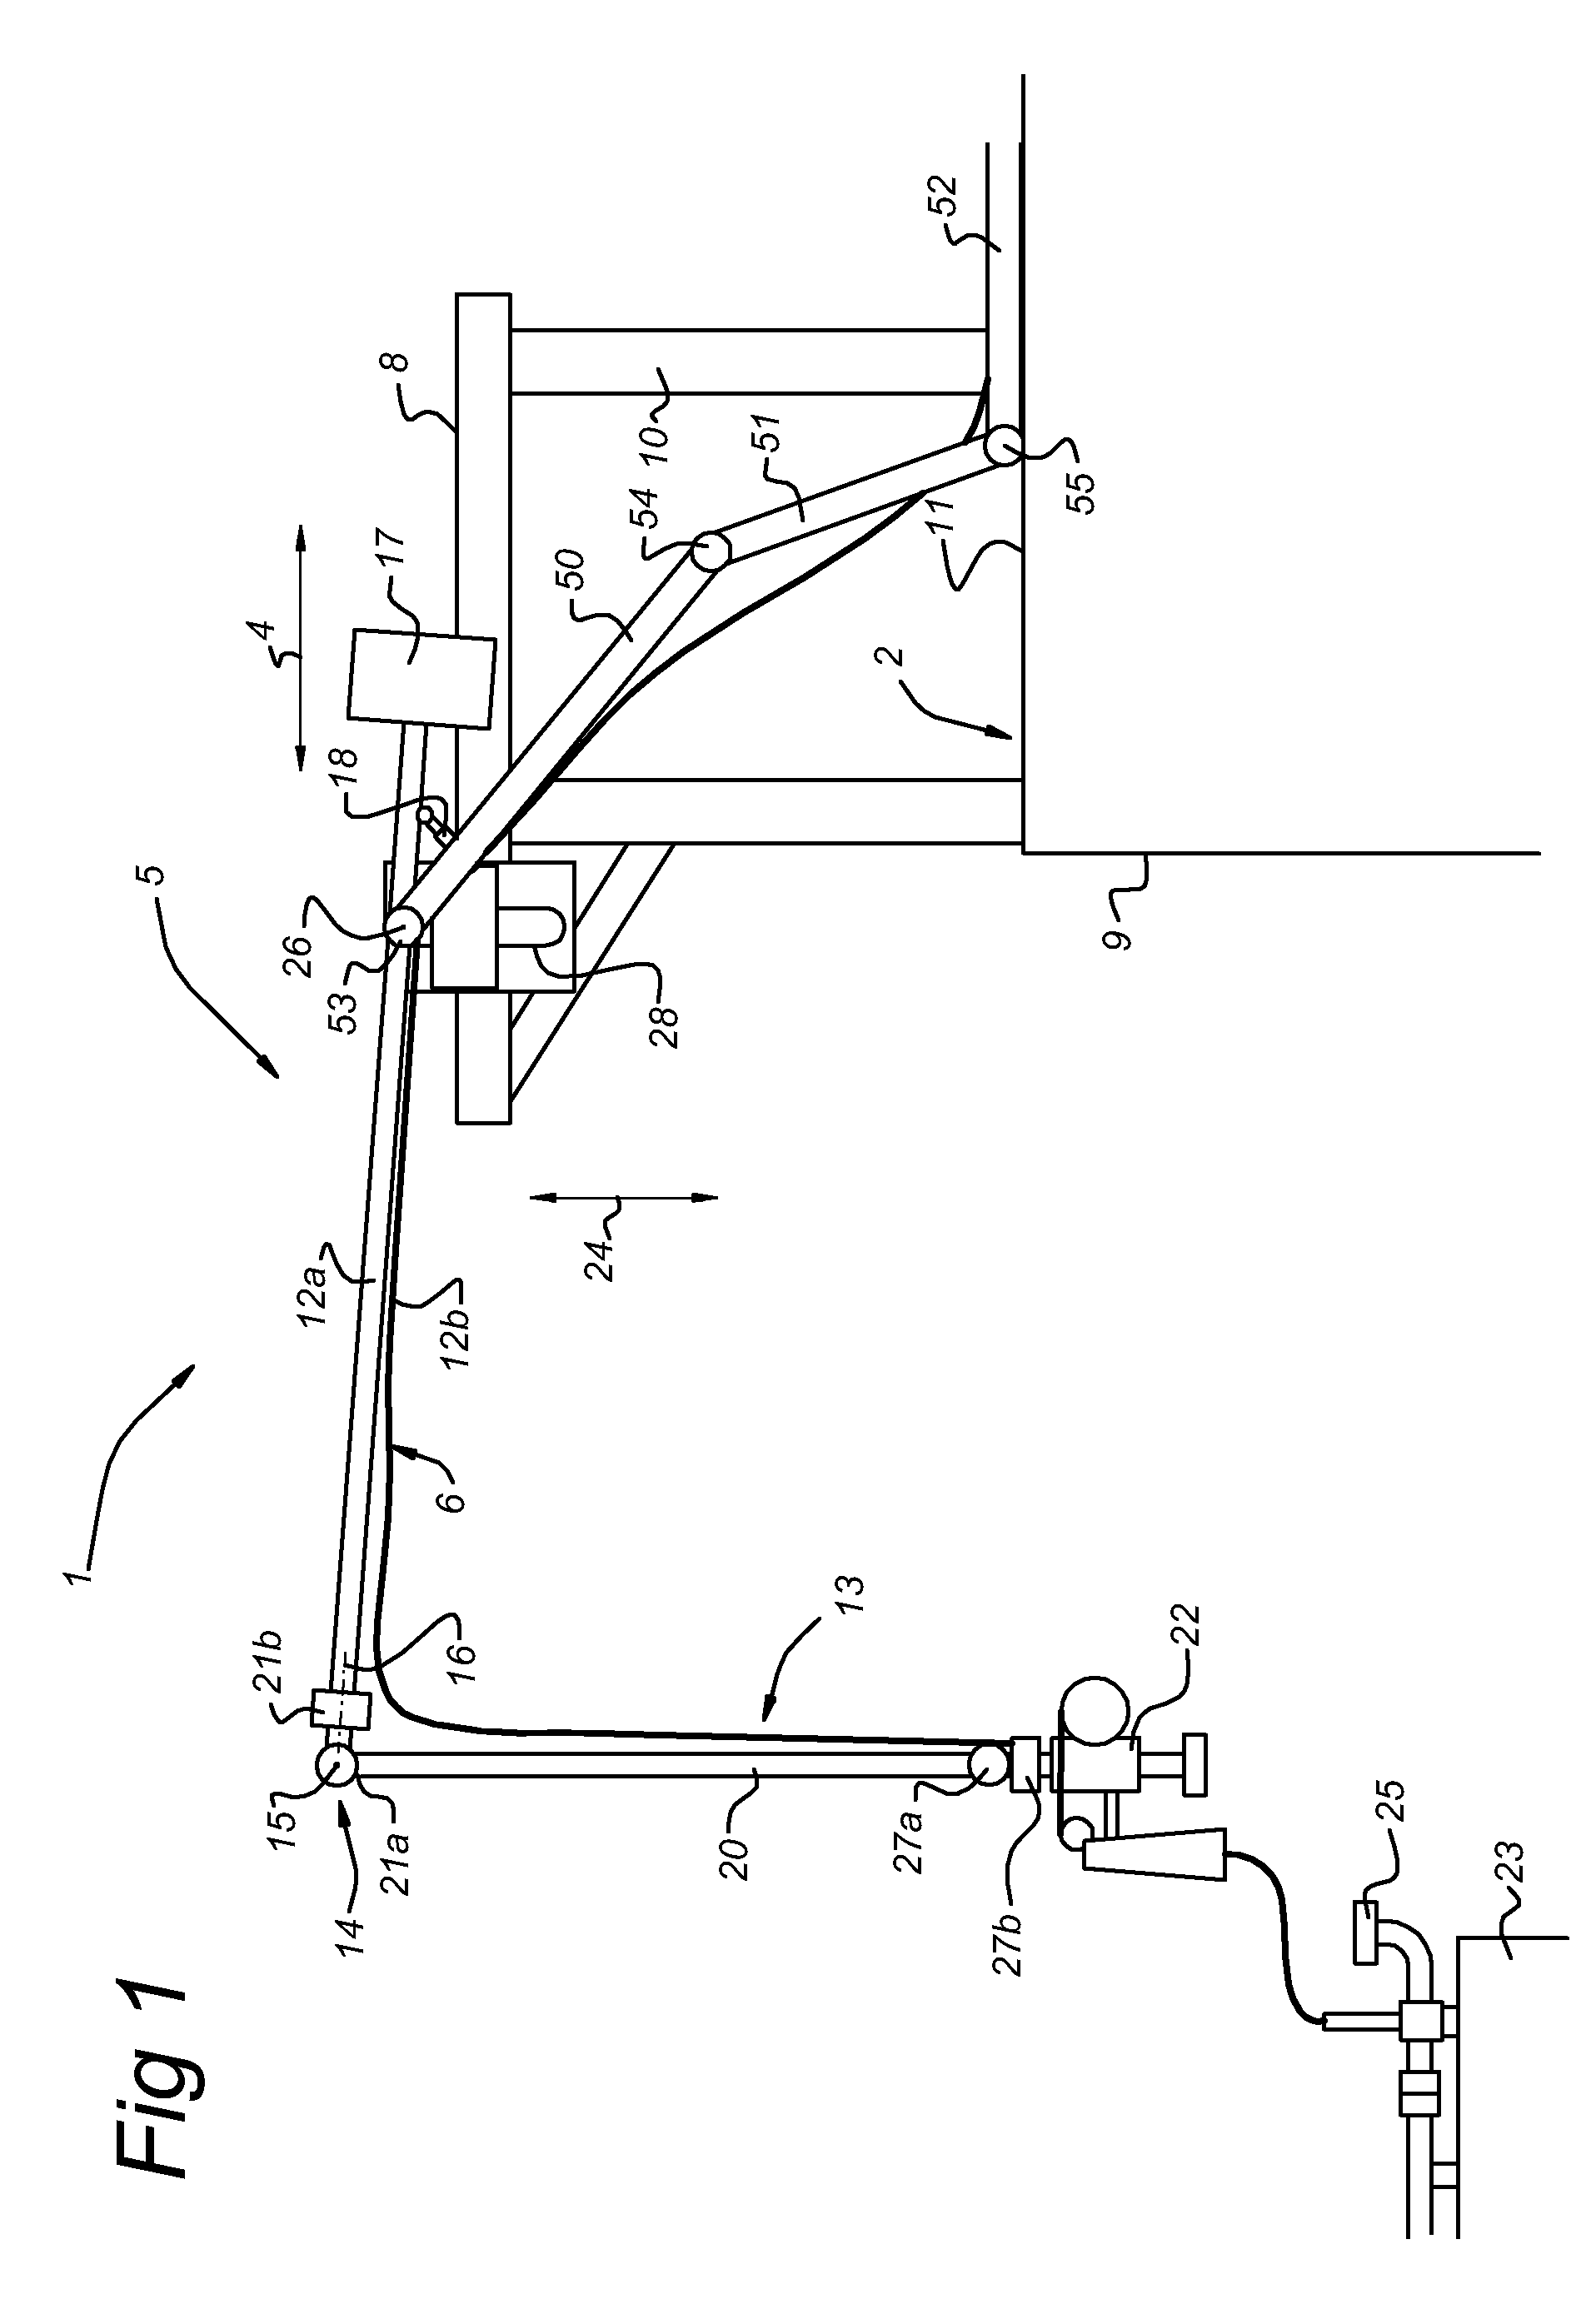 Hydrocarbon transfer system with horizontal displacement